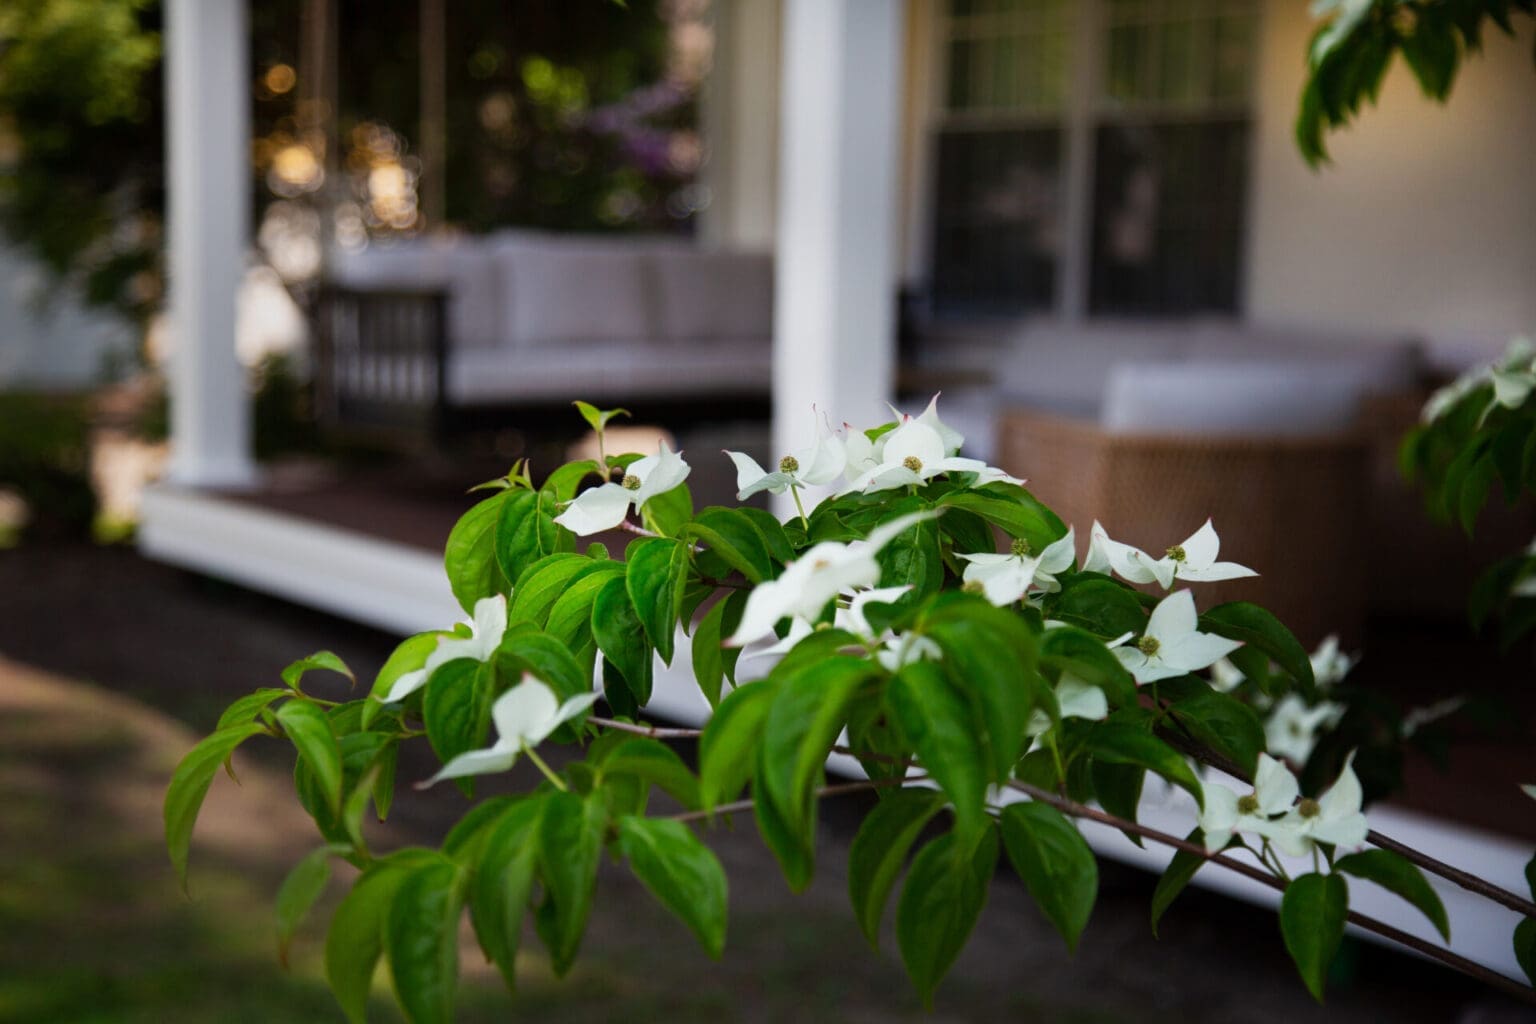 A photo of a kousa dogwood plant in front of a farmer's porch.